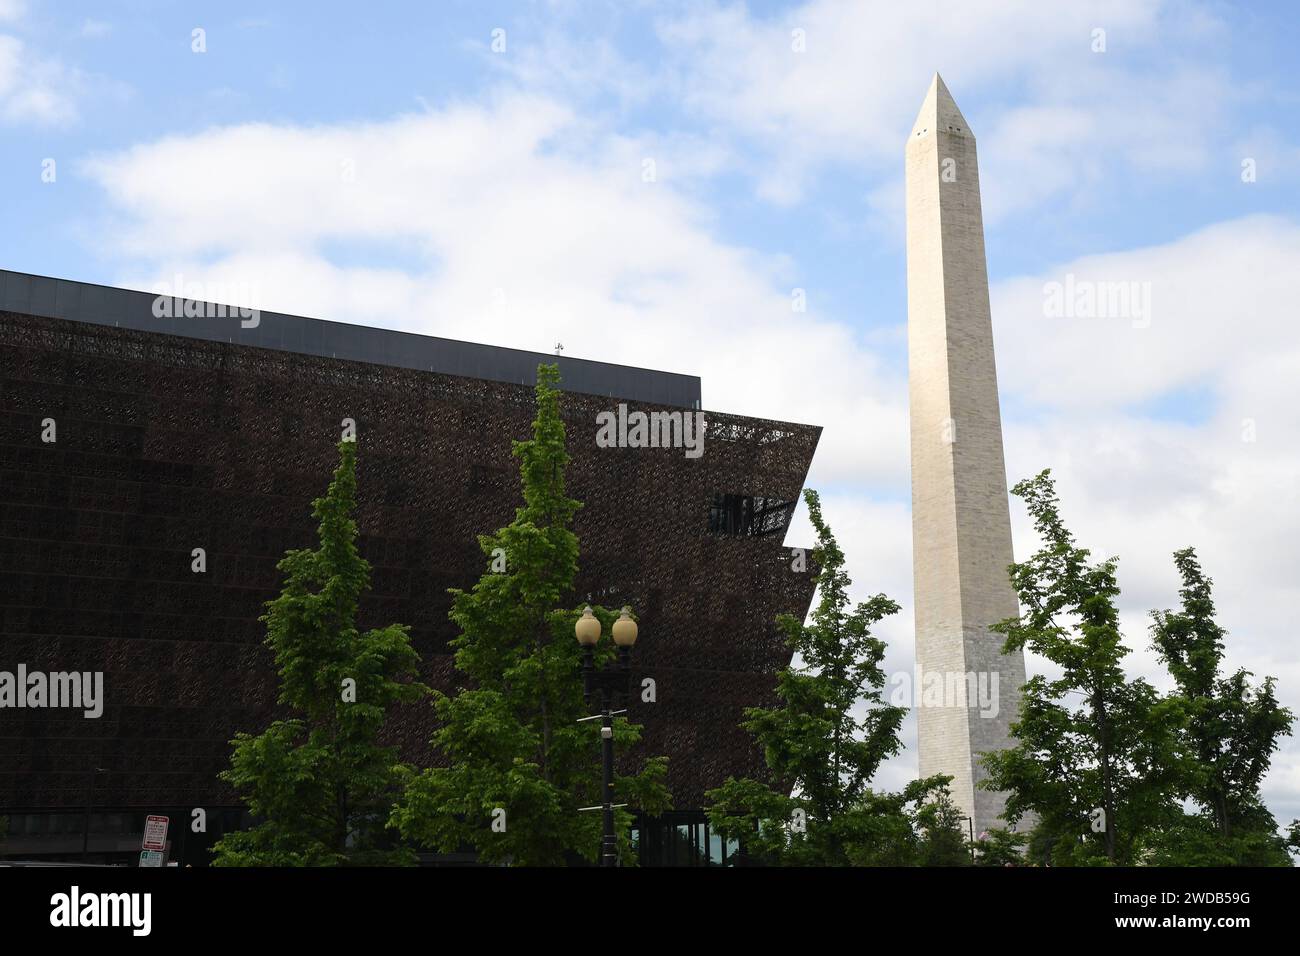 WASHINGTON D C/District of Columbia/USA./ 06.May. 2019/Newly built The National Museum of frican American culture and history on 1400 constitution avenue in DC, USA Photo..Francis Dean / Deanpictures. Stock Photo